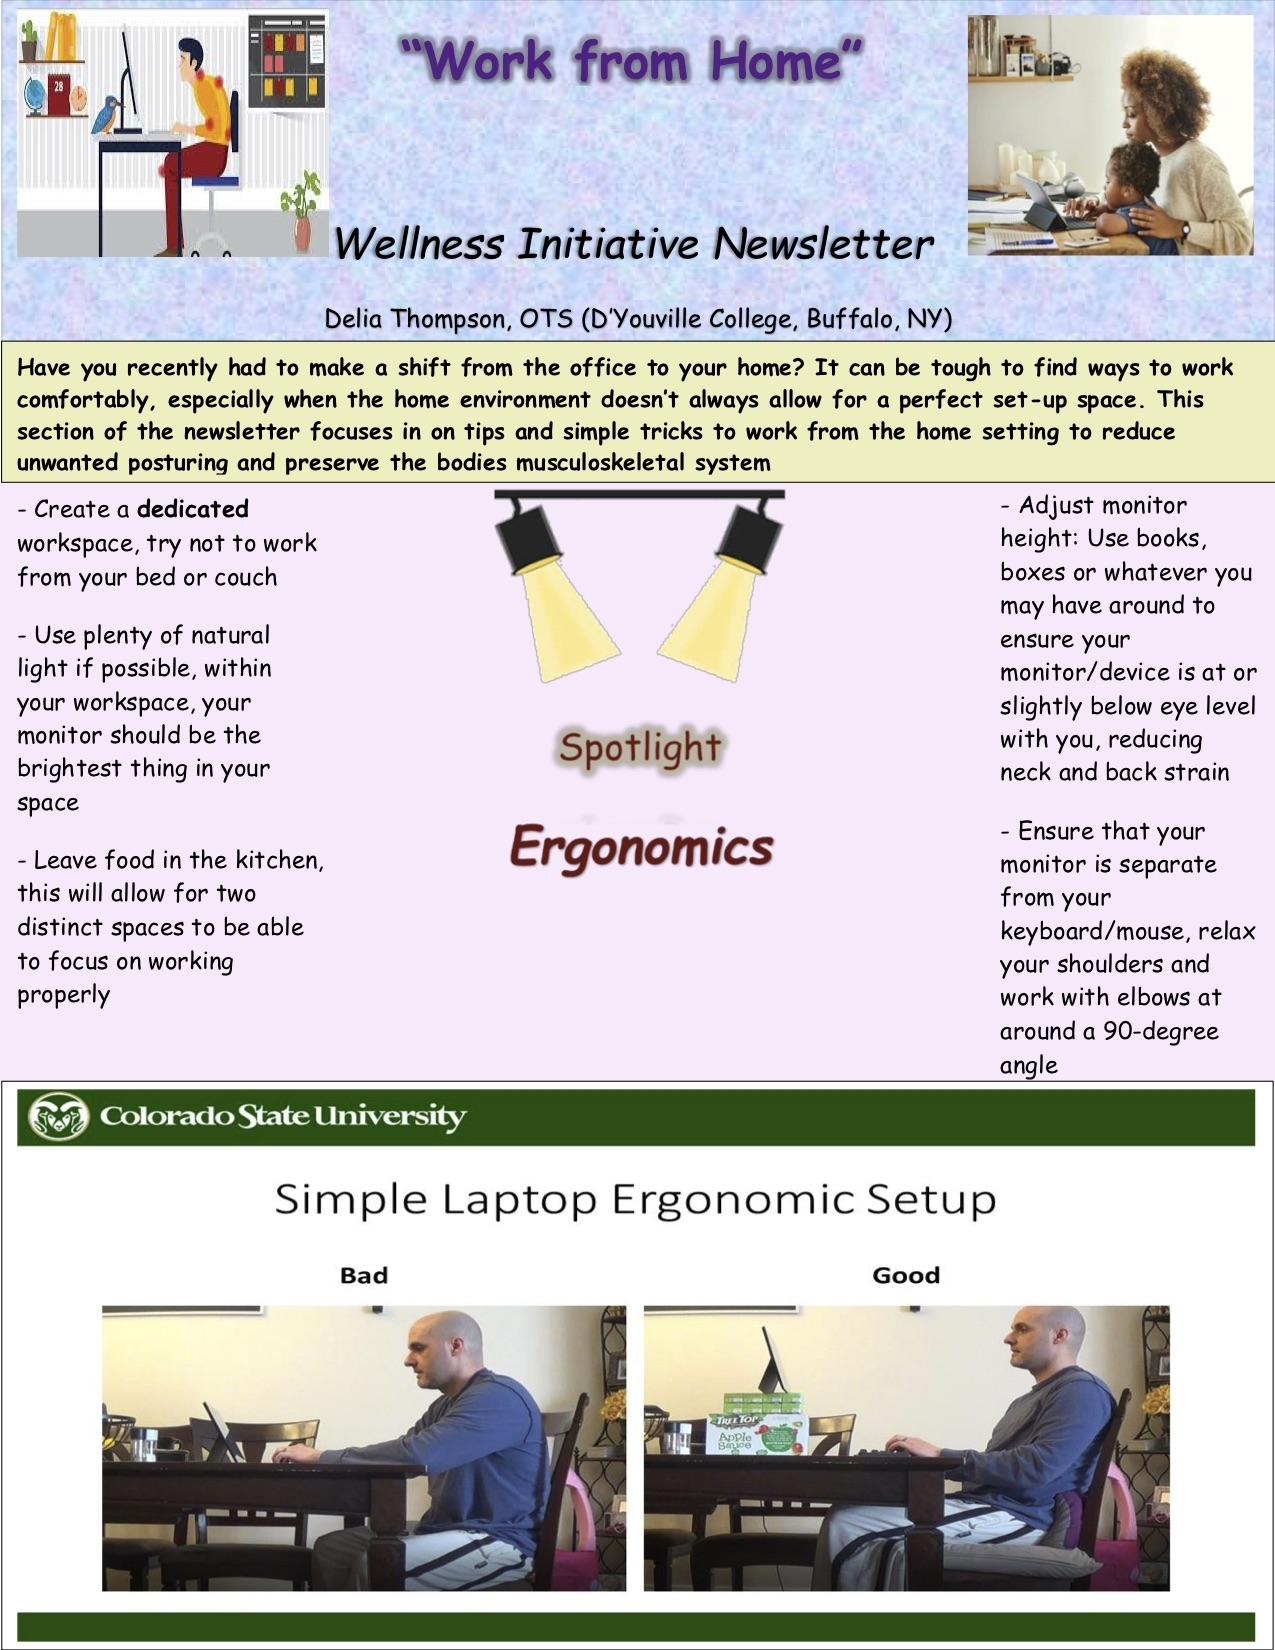 Working From Home? Here Are Some Ergonomic Tips Provided